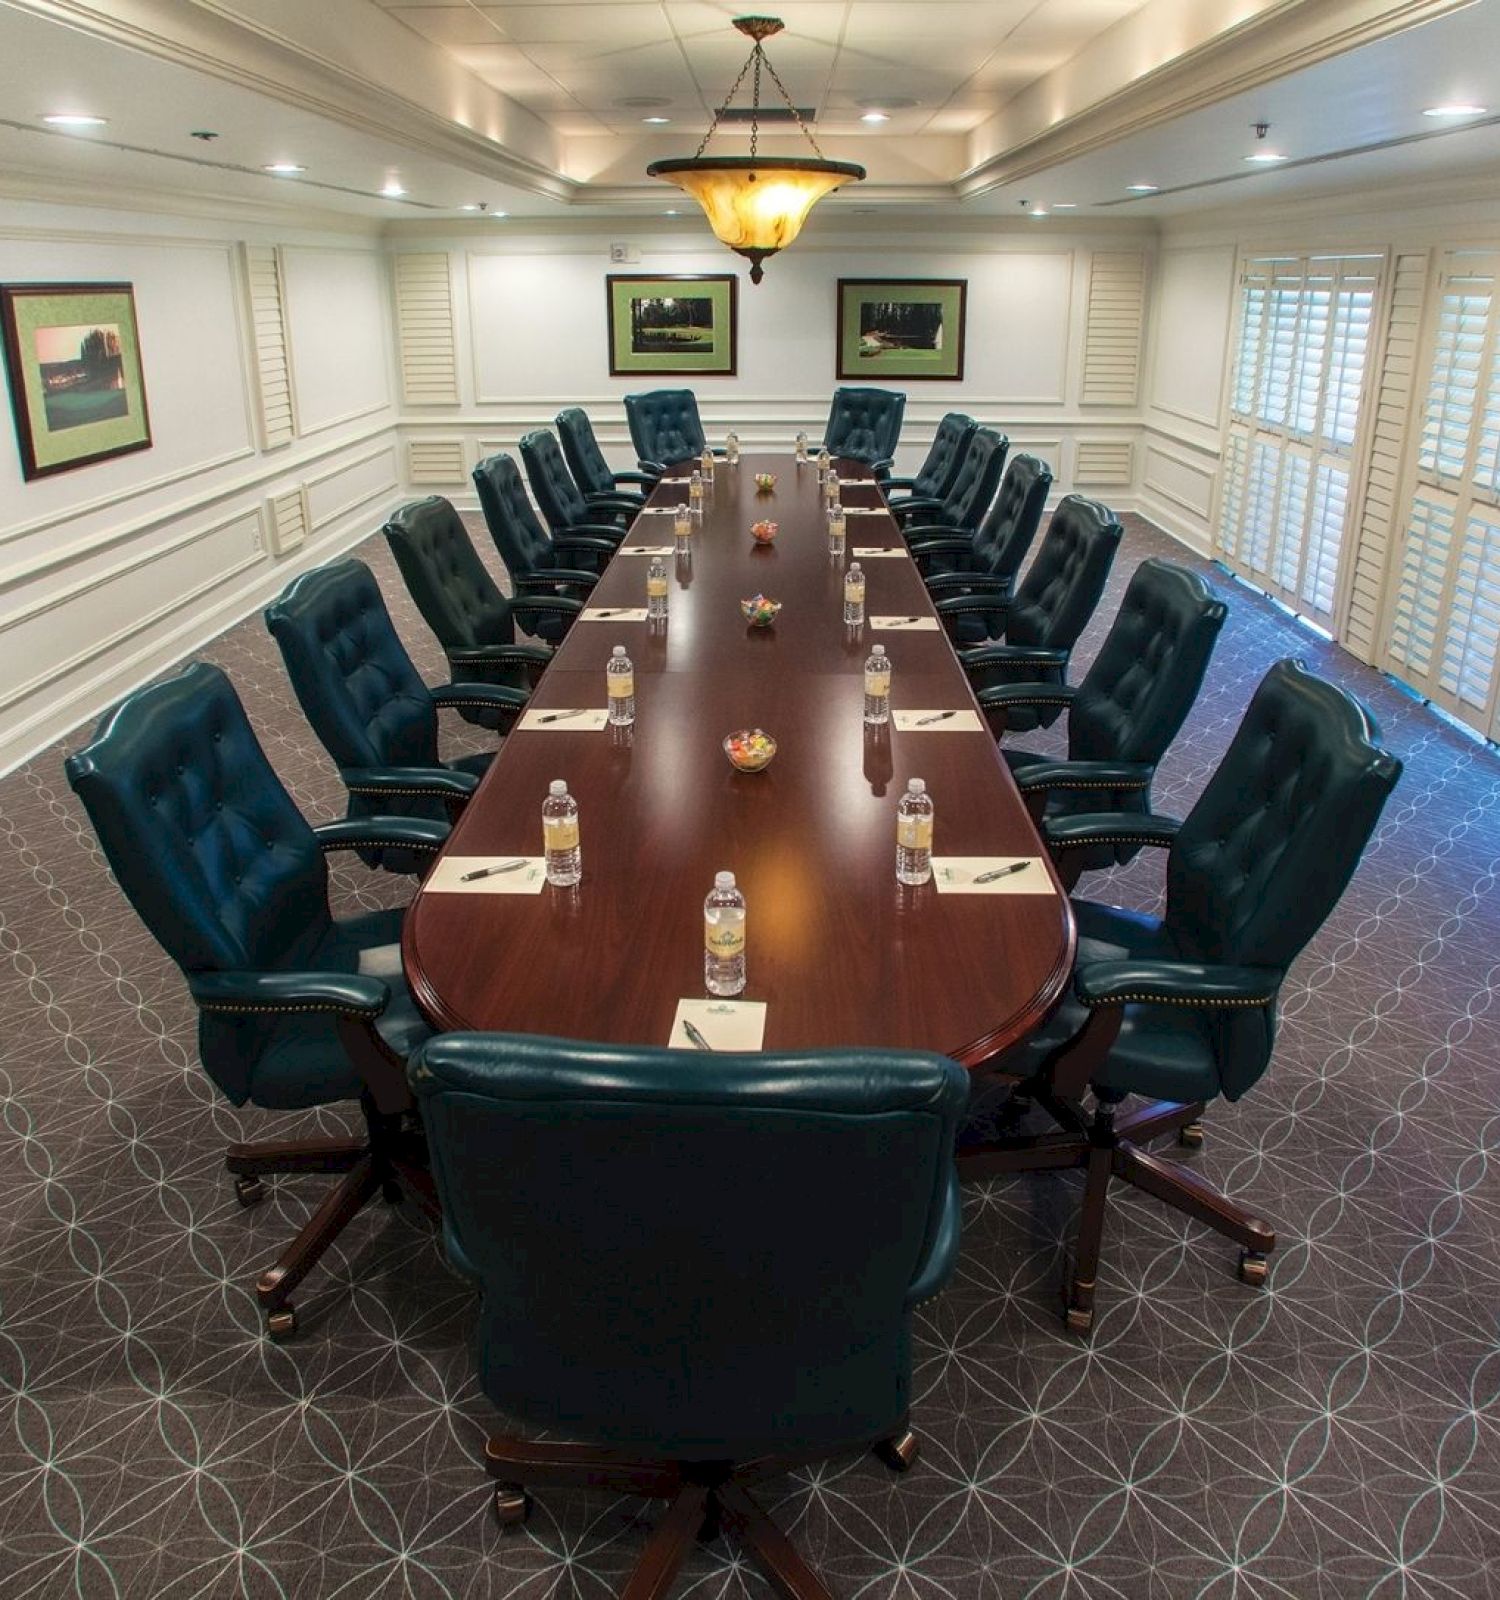 Elegant boardroom with a long table, chairs, and paintings on the wall.